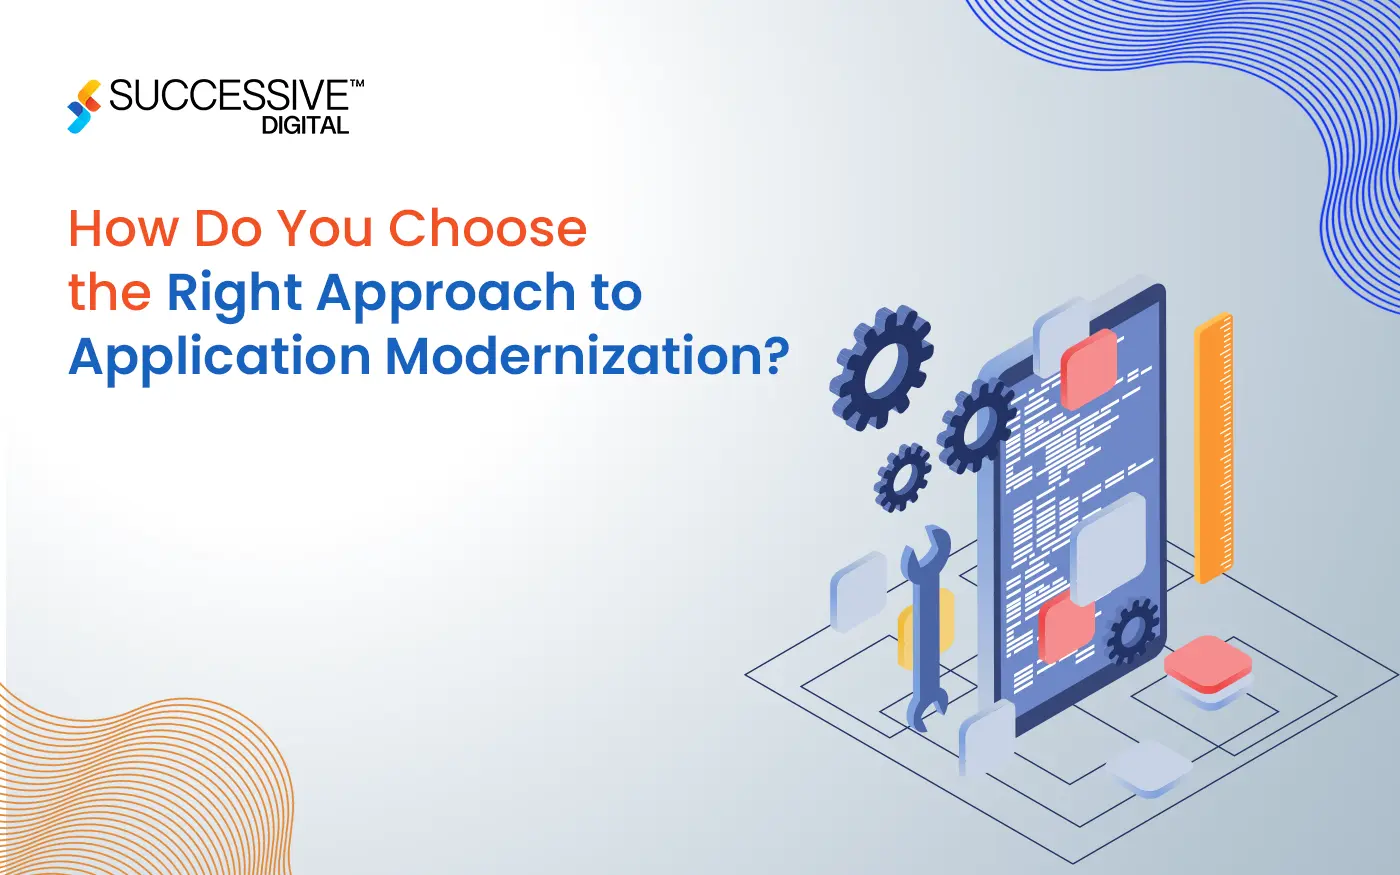 How Do You Choose the Right Approach to Application Modernization?